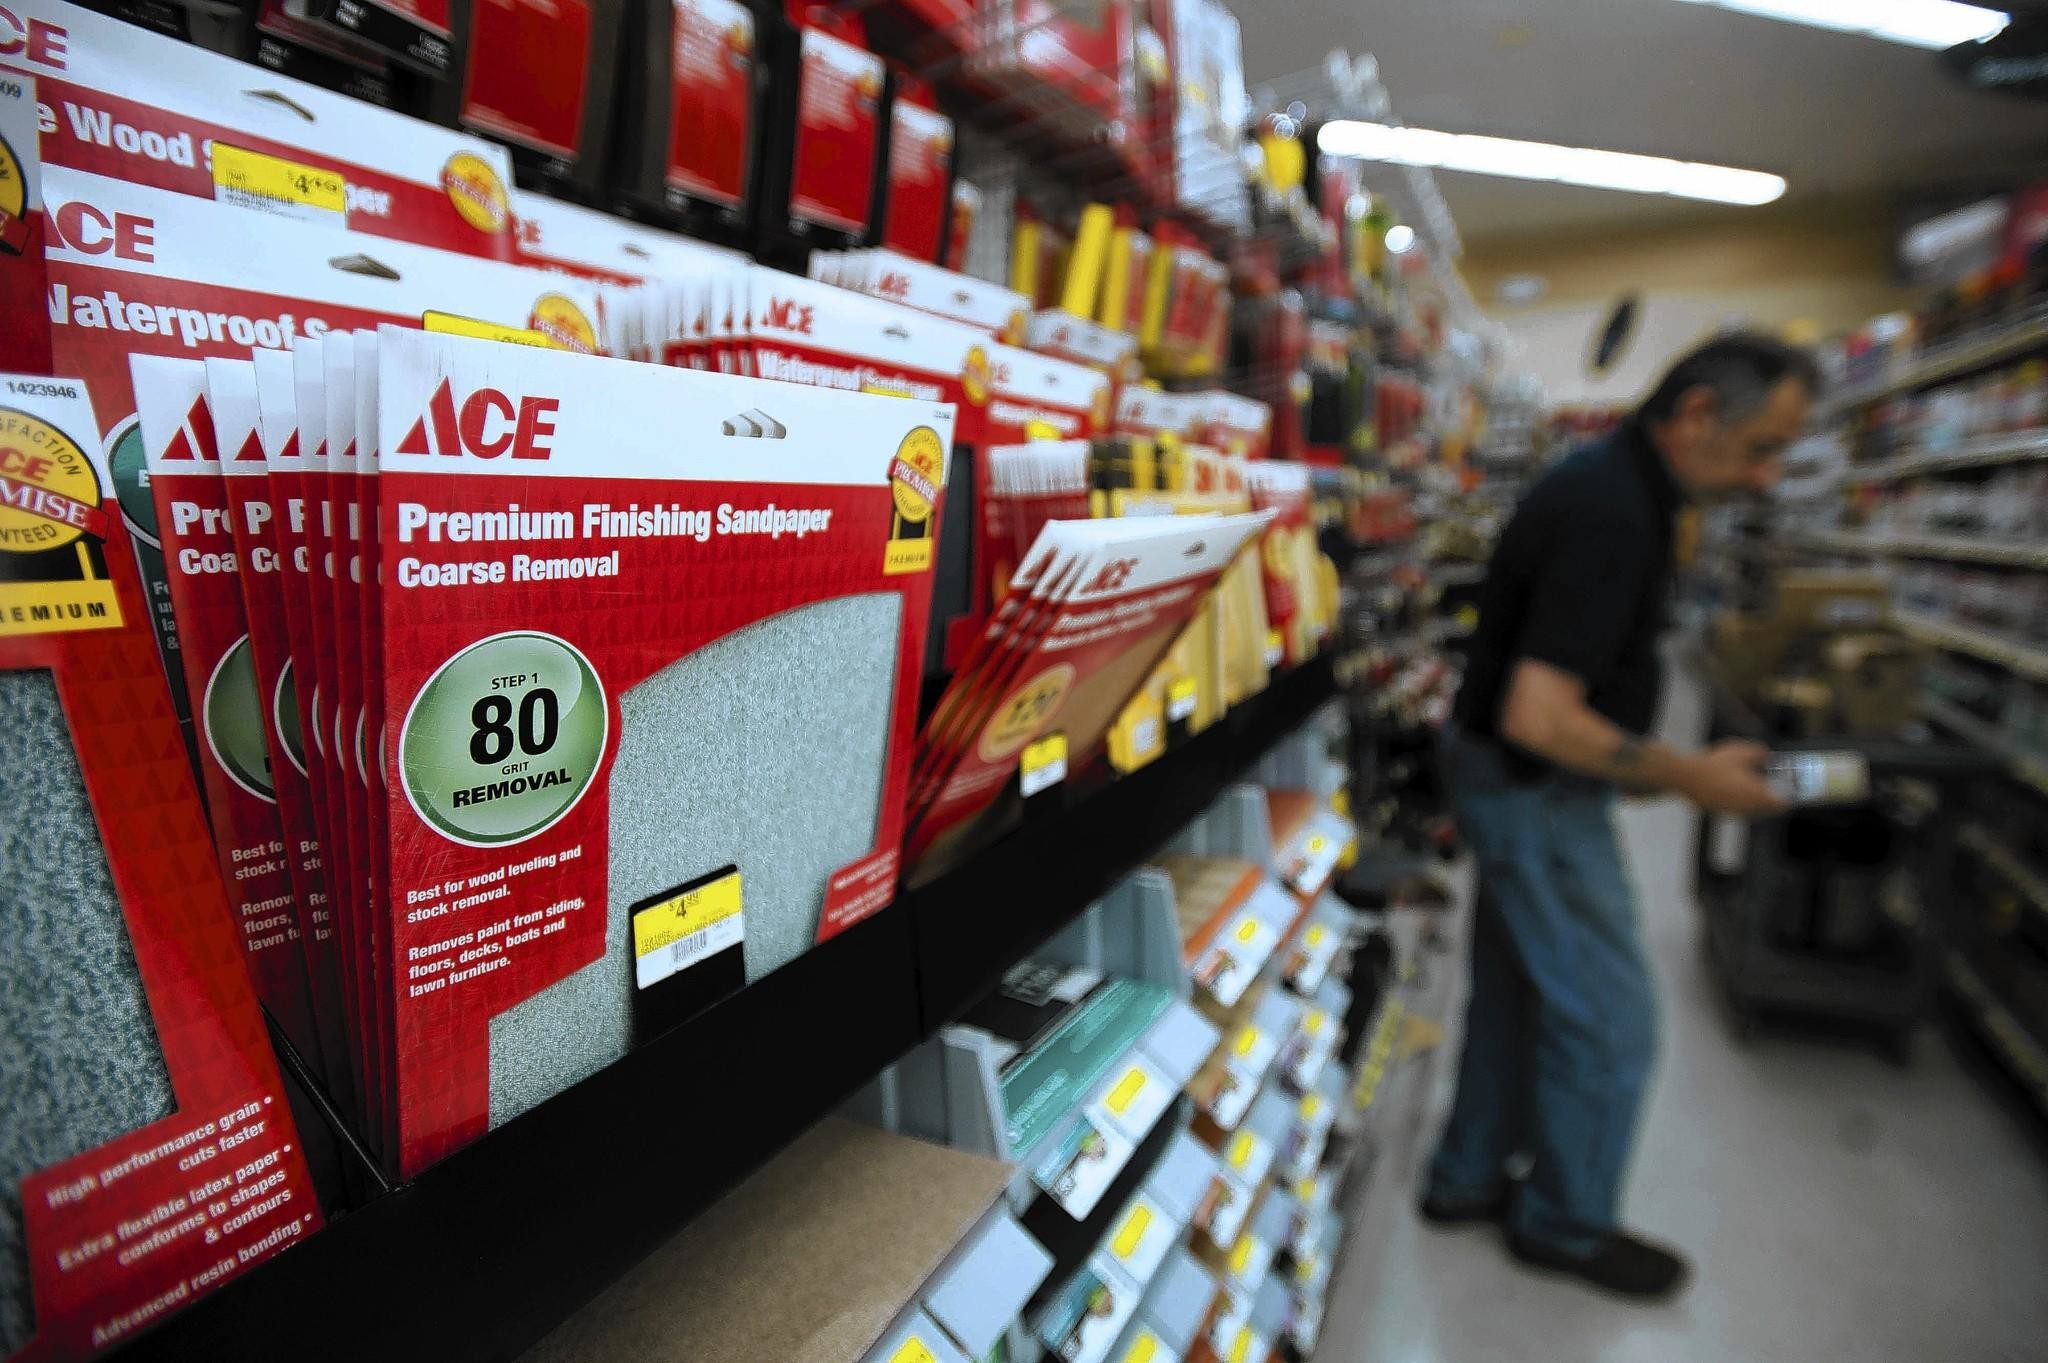 2048x1363 Ace Hardware received a 10-year state tax incentive worth $12.7 million  about two years